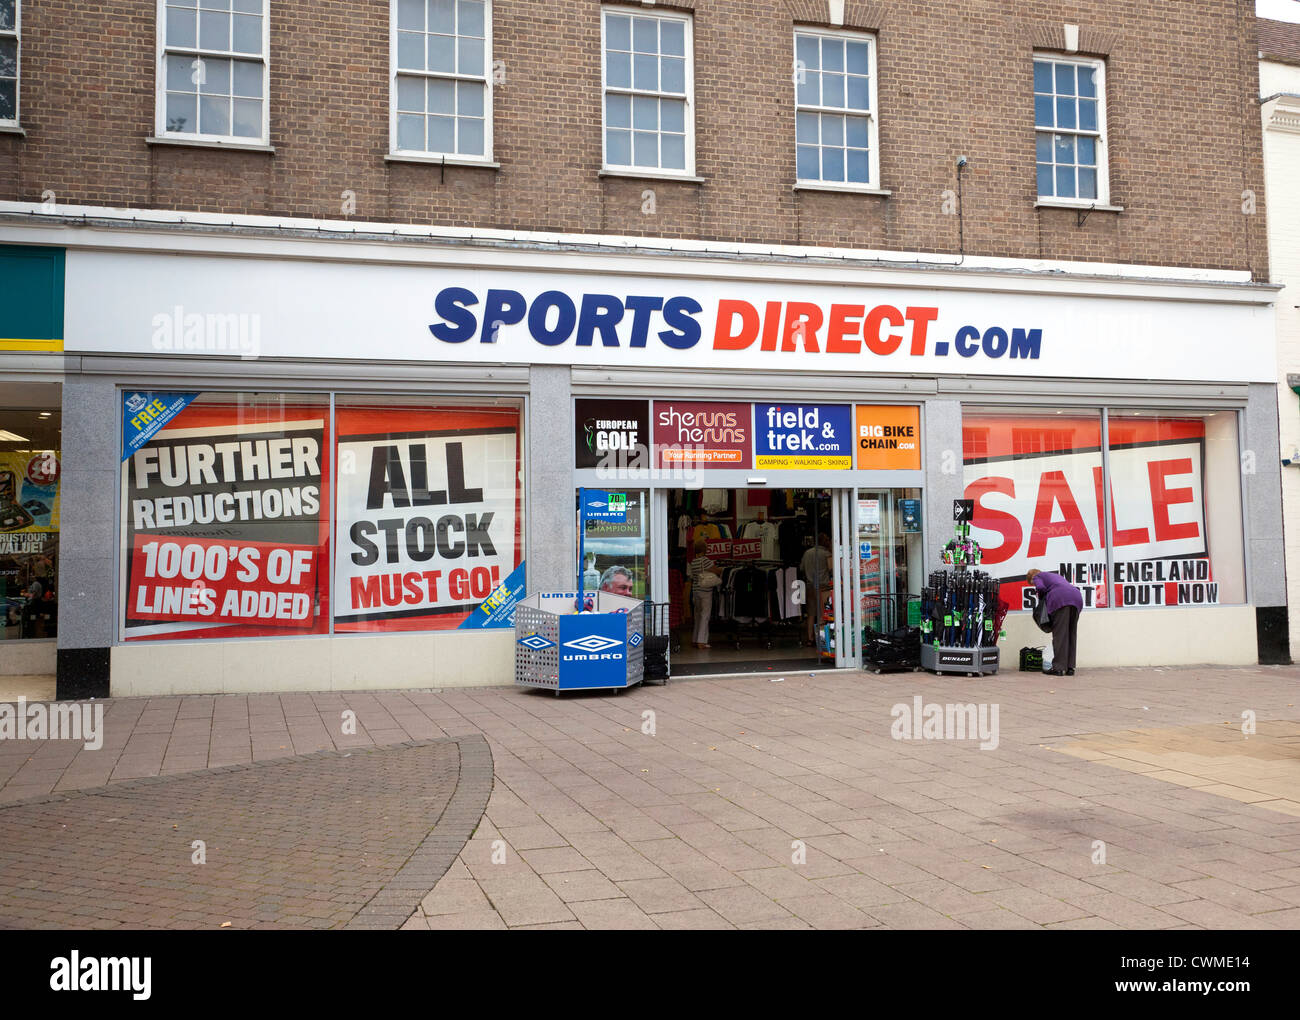 Sports Direct store in the UK Stock Photo